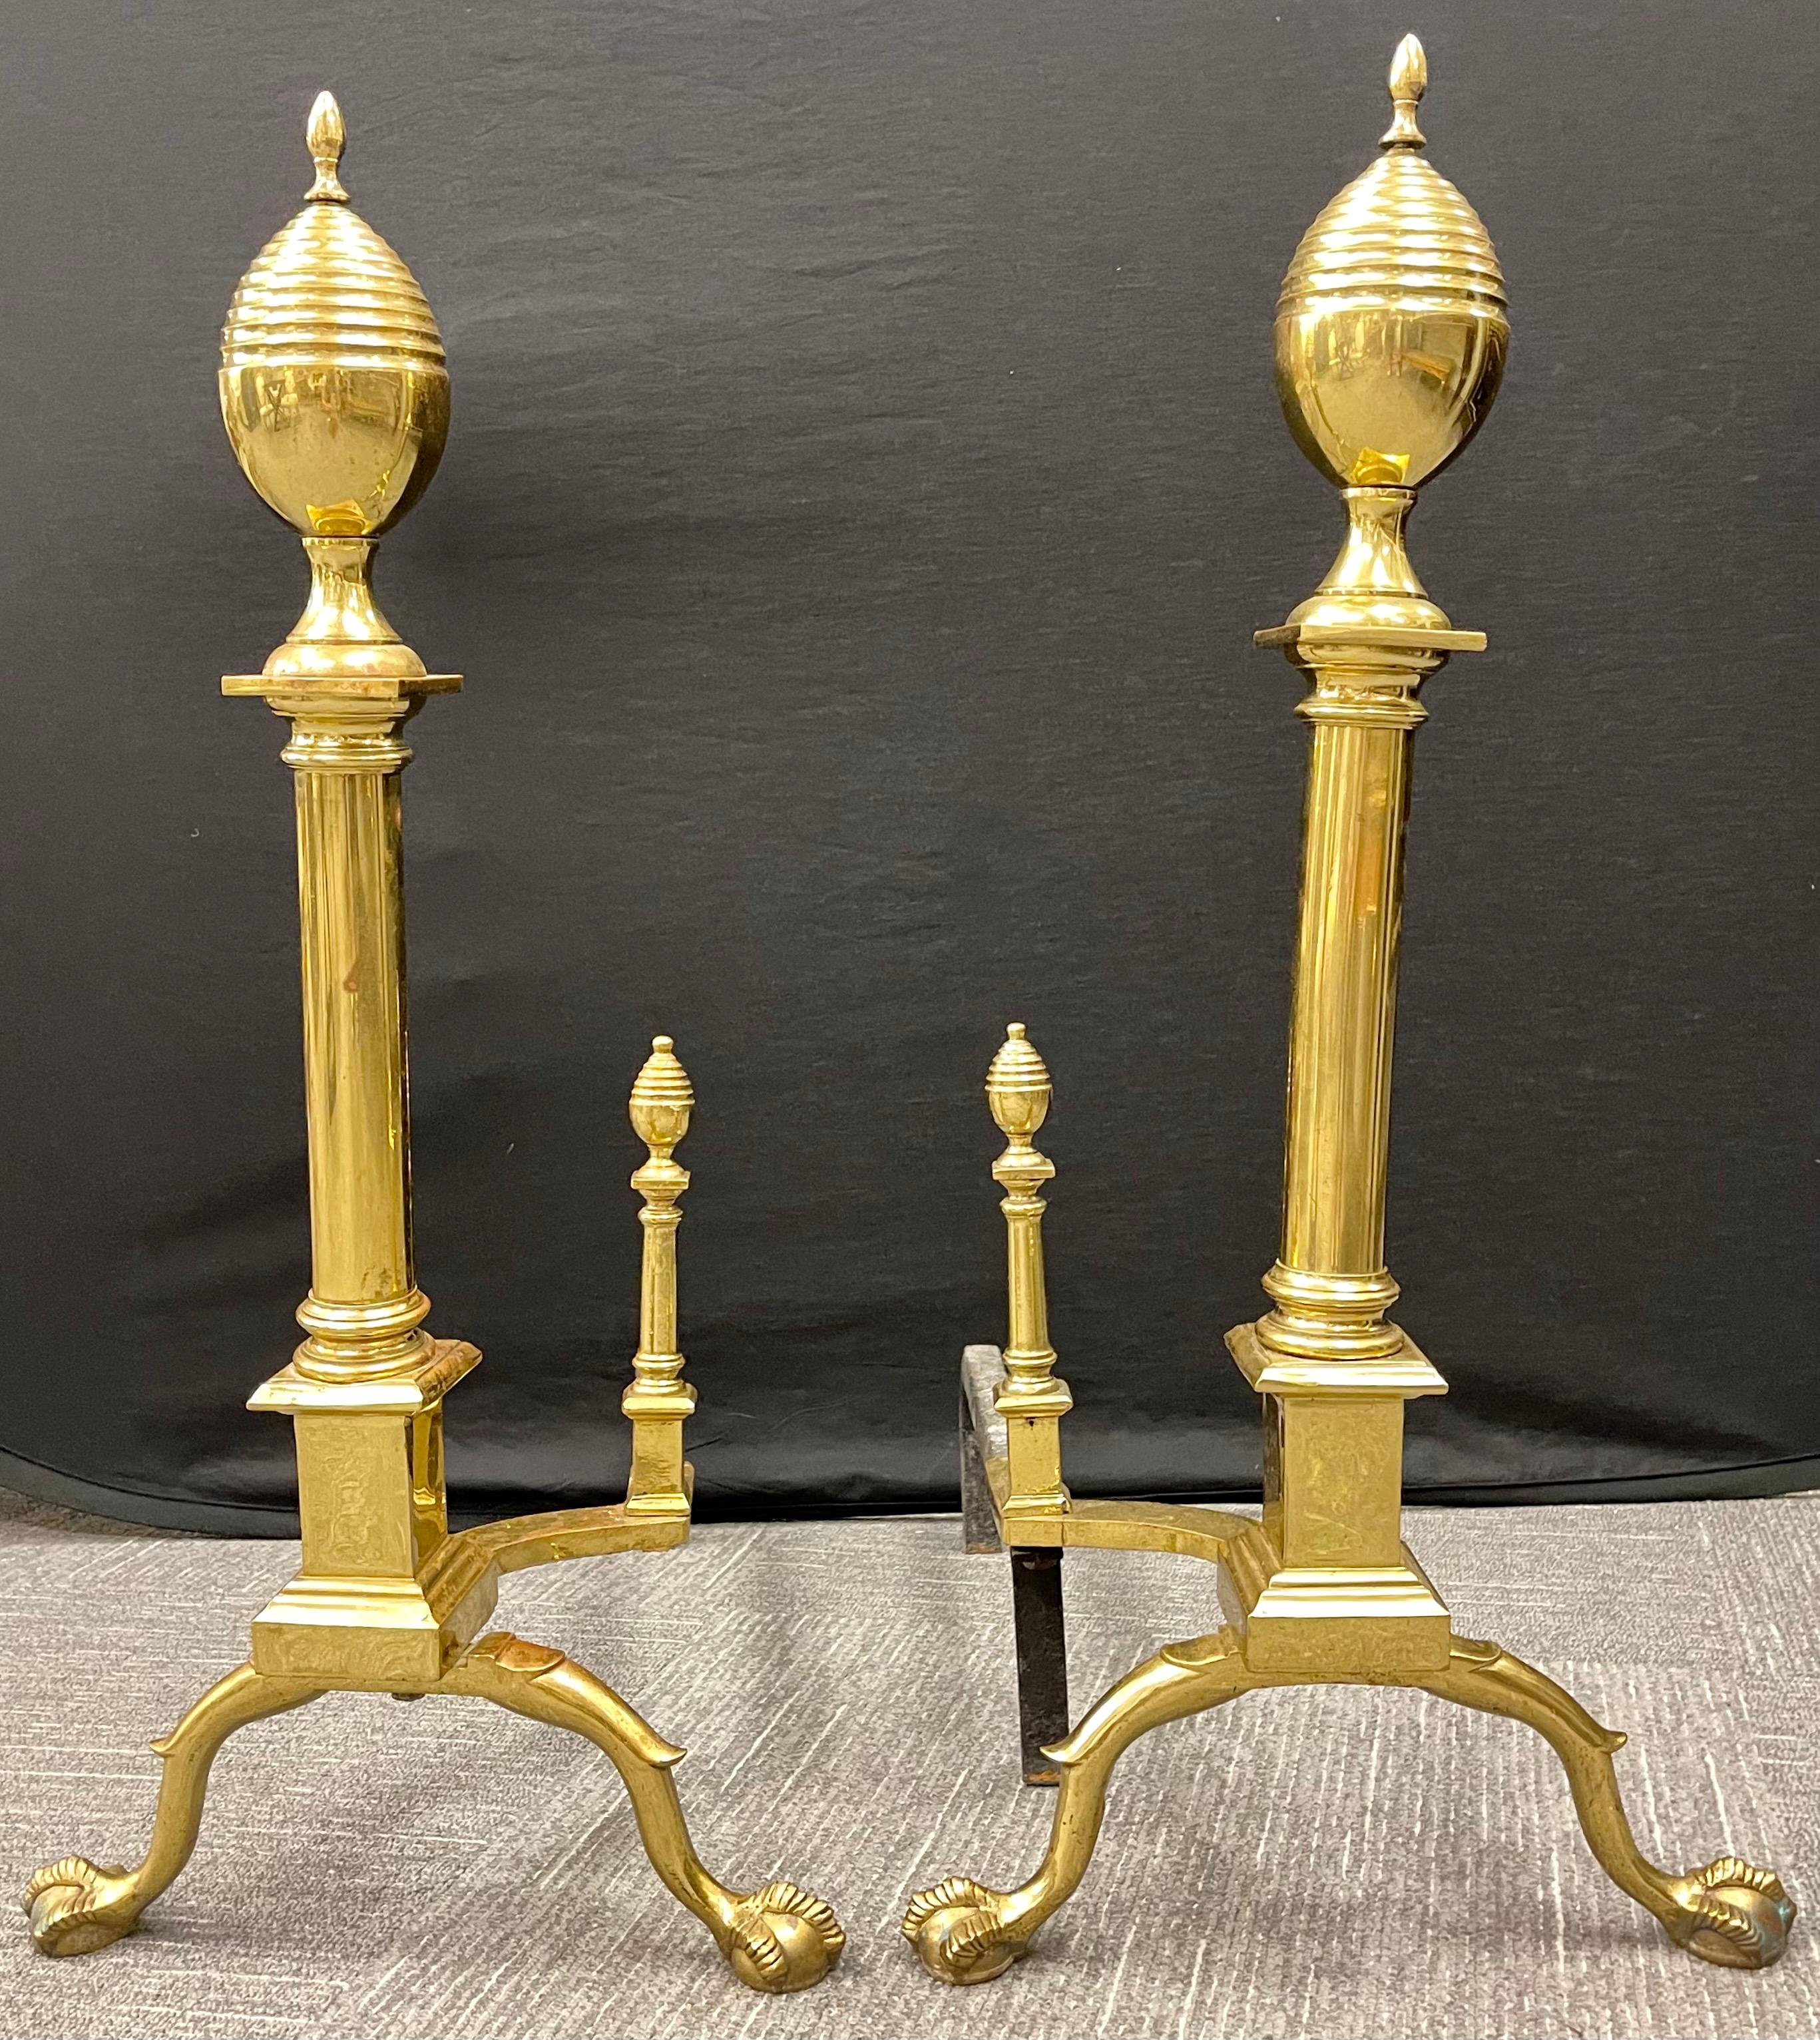 Pair of large Bronze Georgian style andirons. These large and impressive andirons have been polished and are ready to sit in front of any fireplace setting. Set on ball and hairy claw feet leading to column form center and terminating in a oval